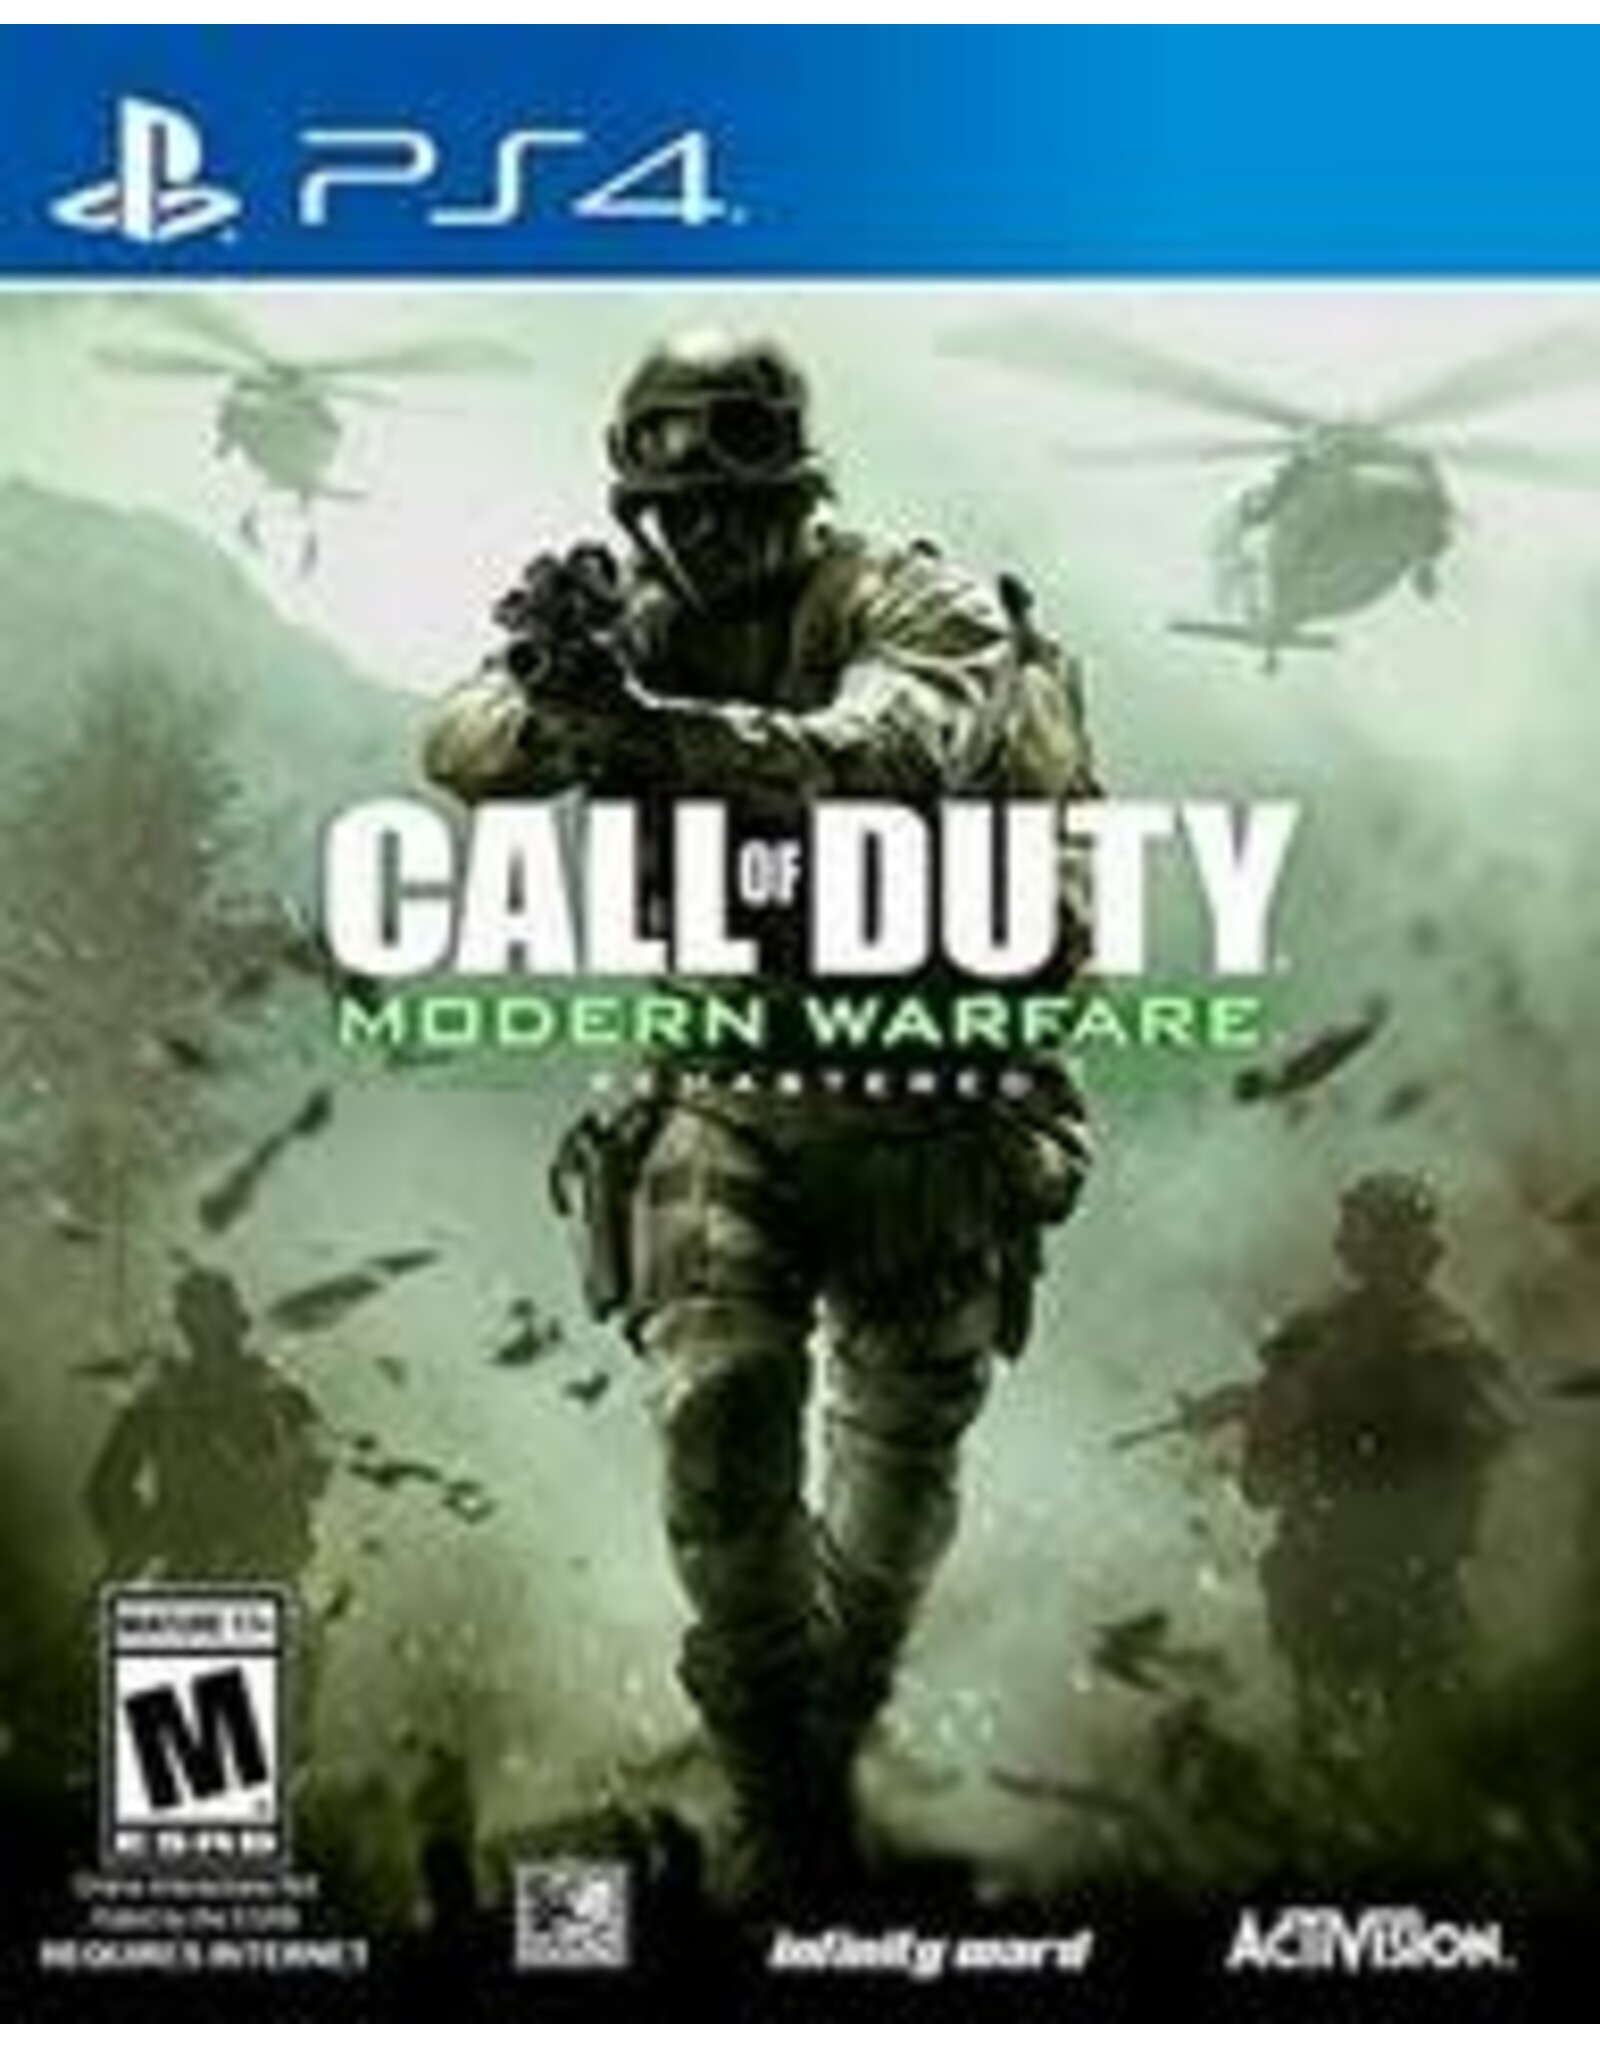 Playstation 4 Call of Duty: Modern Warfare Remastered (Used)